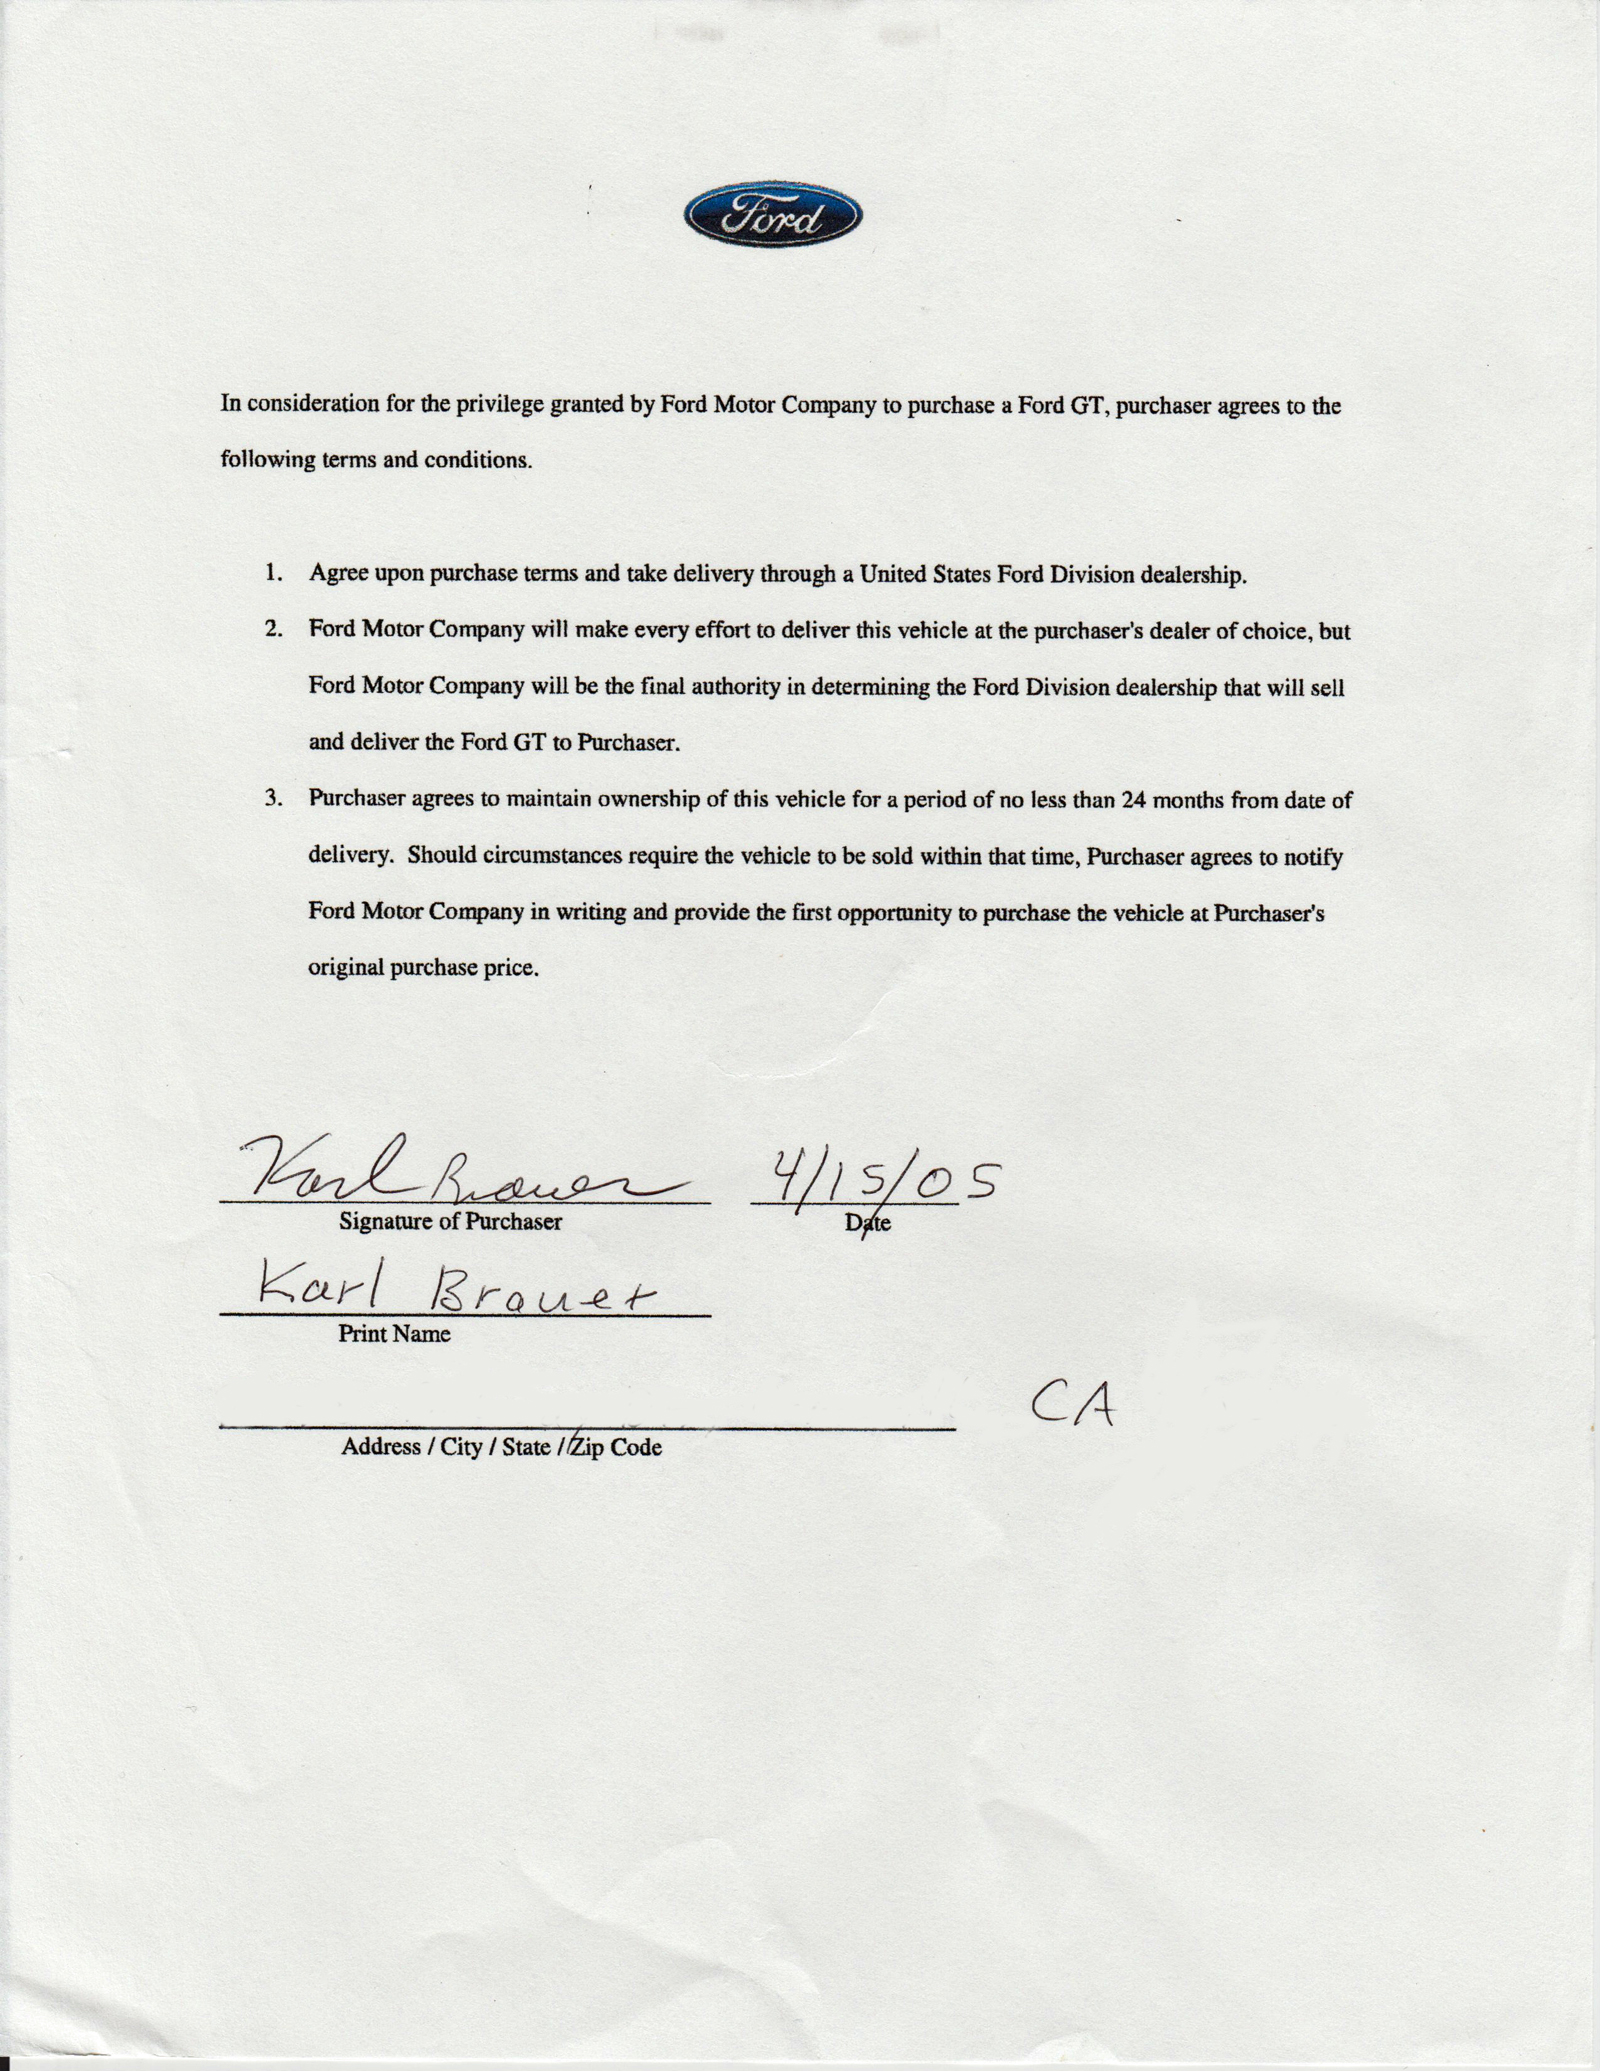 2005 Ford GT Purchase Agreement